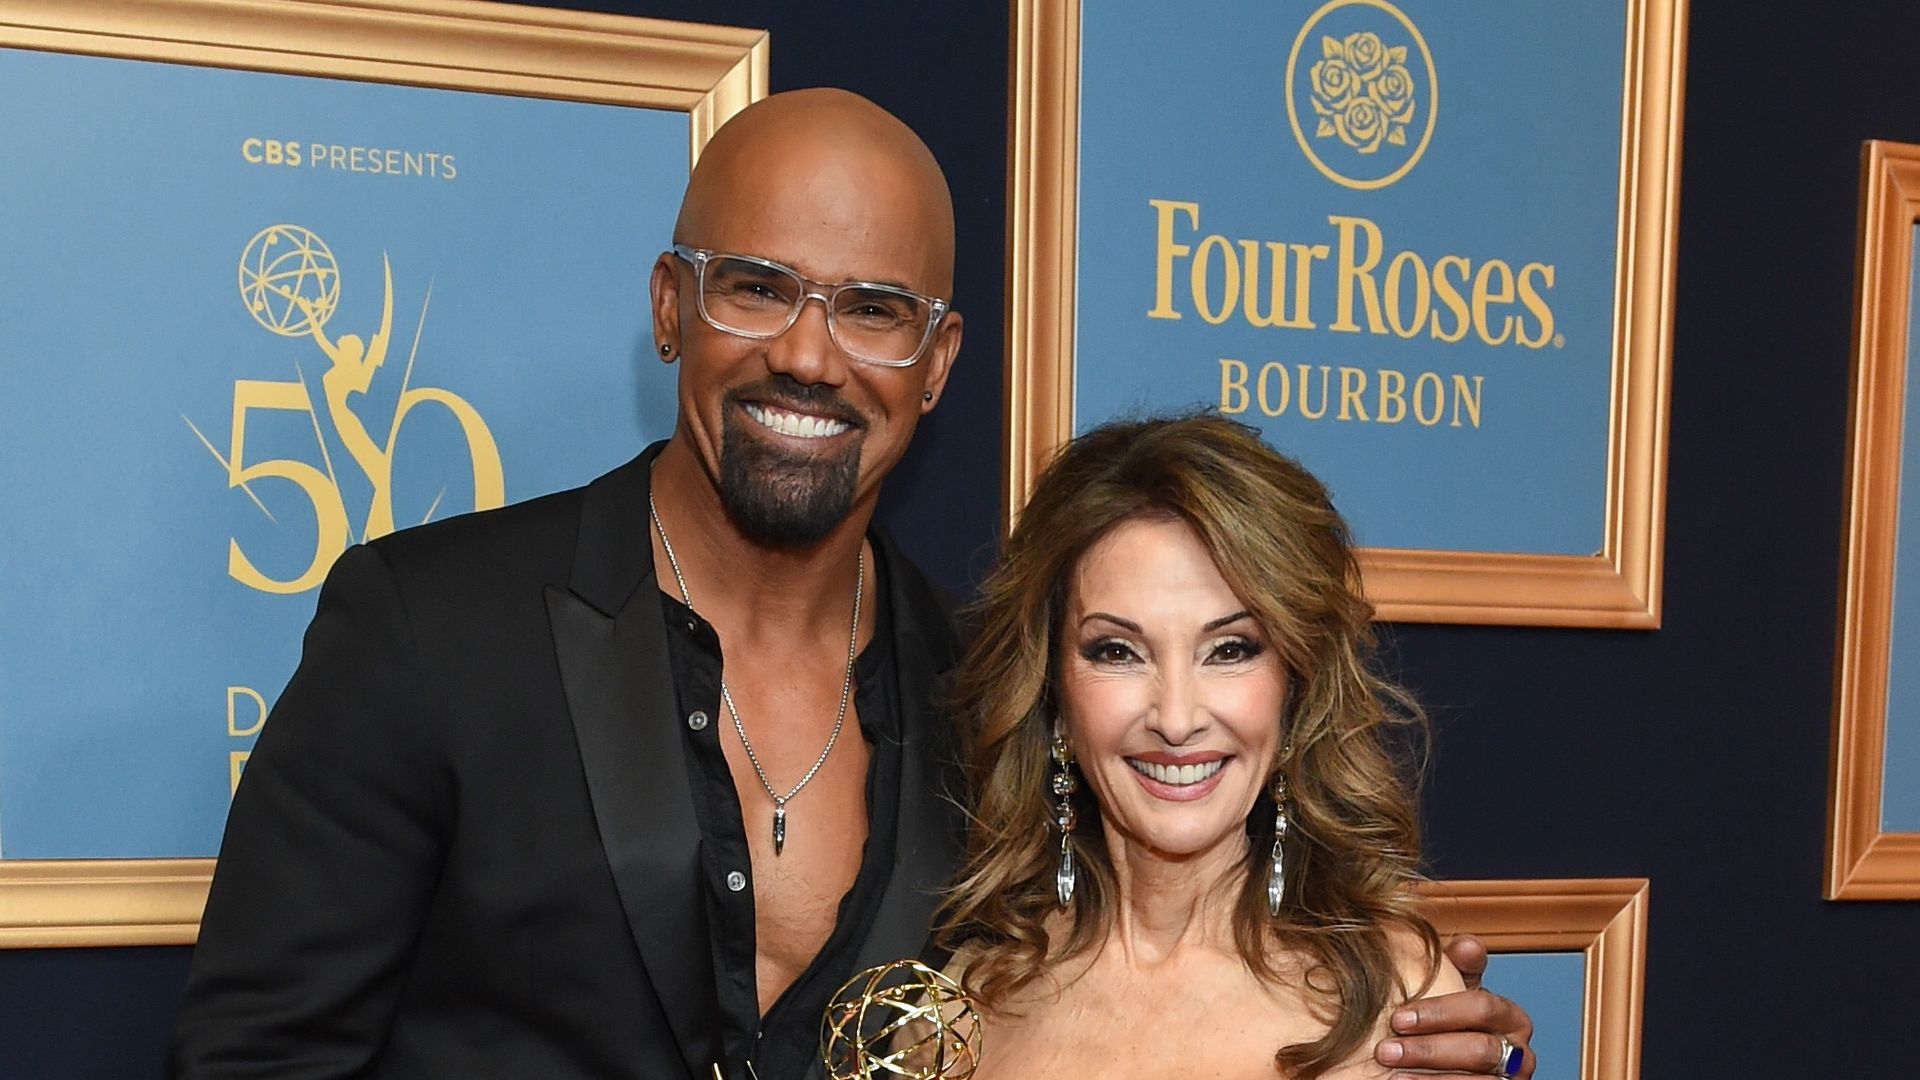 Shemar Moore and Susan Lucci pose with the Emmy Award for Lifetime Achievement at the 50th Annual Daytime Emmy Awards 